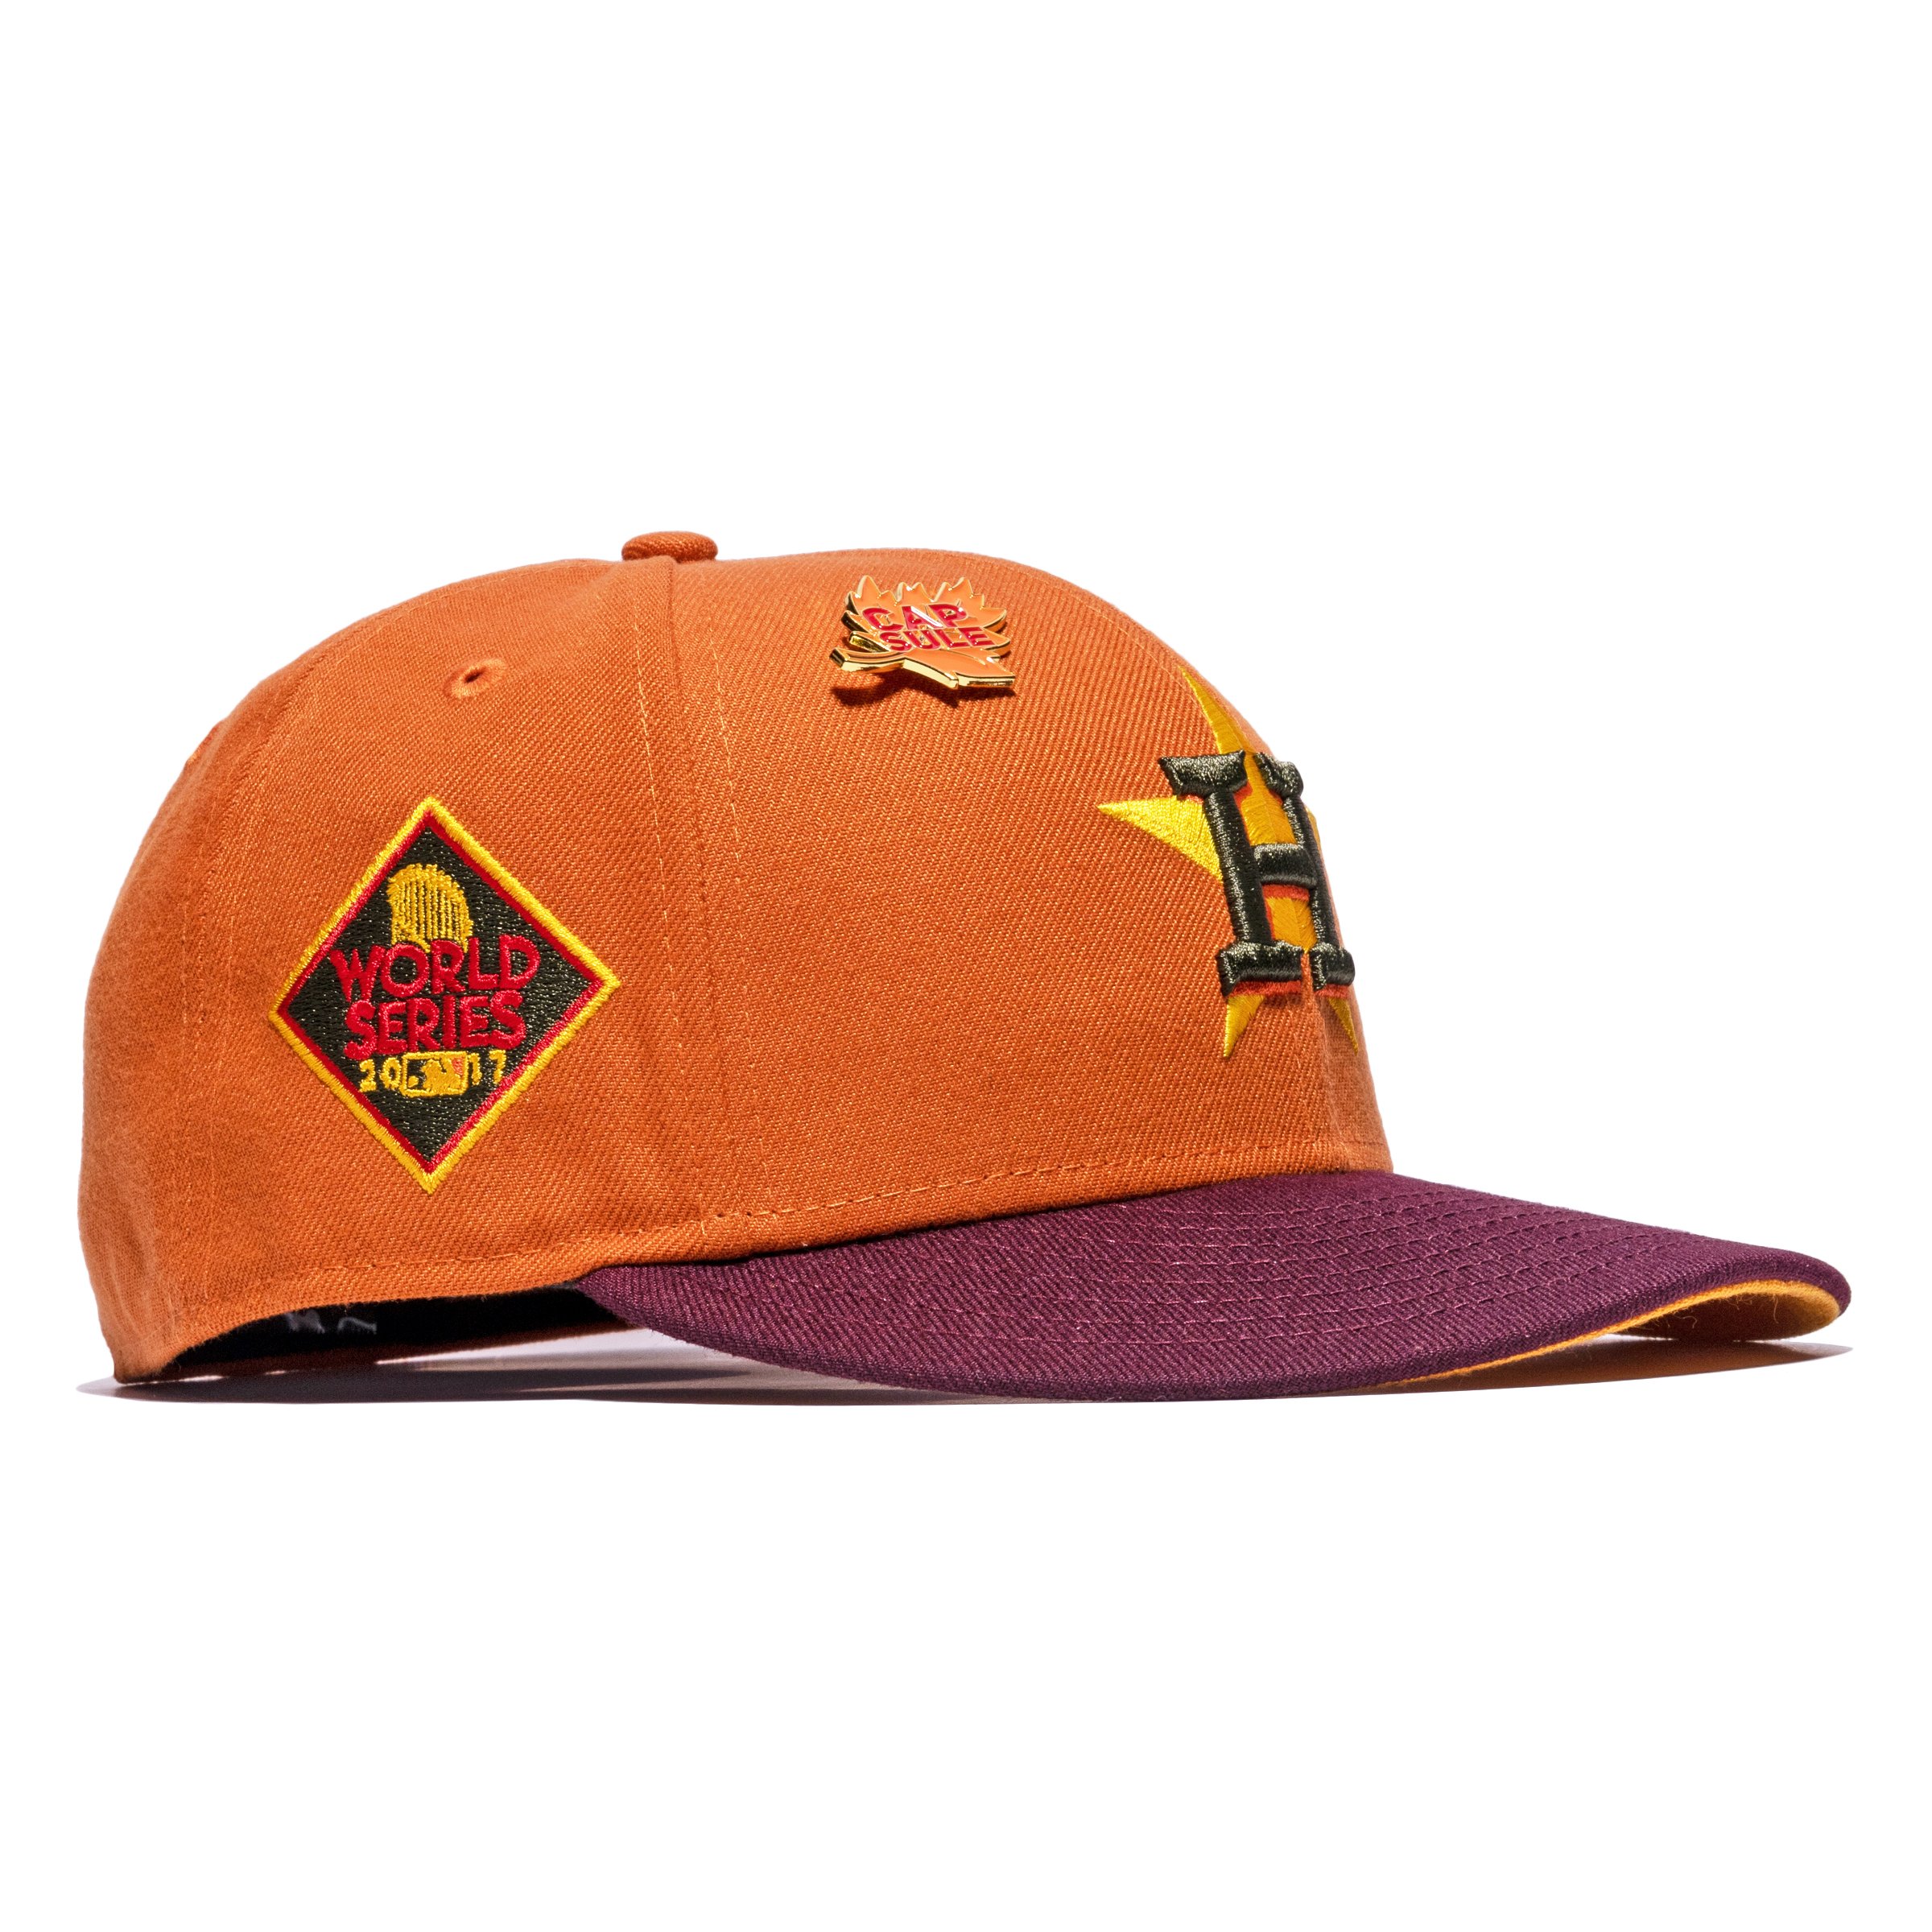 New Era Houston Astros Fall Collection 2017 World Series Capsule Hats Exclusive 59Fifty Fitted Hat Orange/Yellow